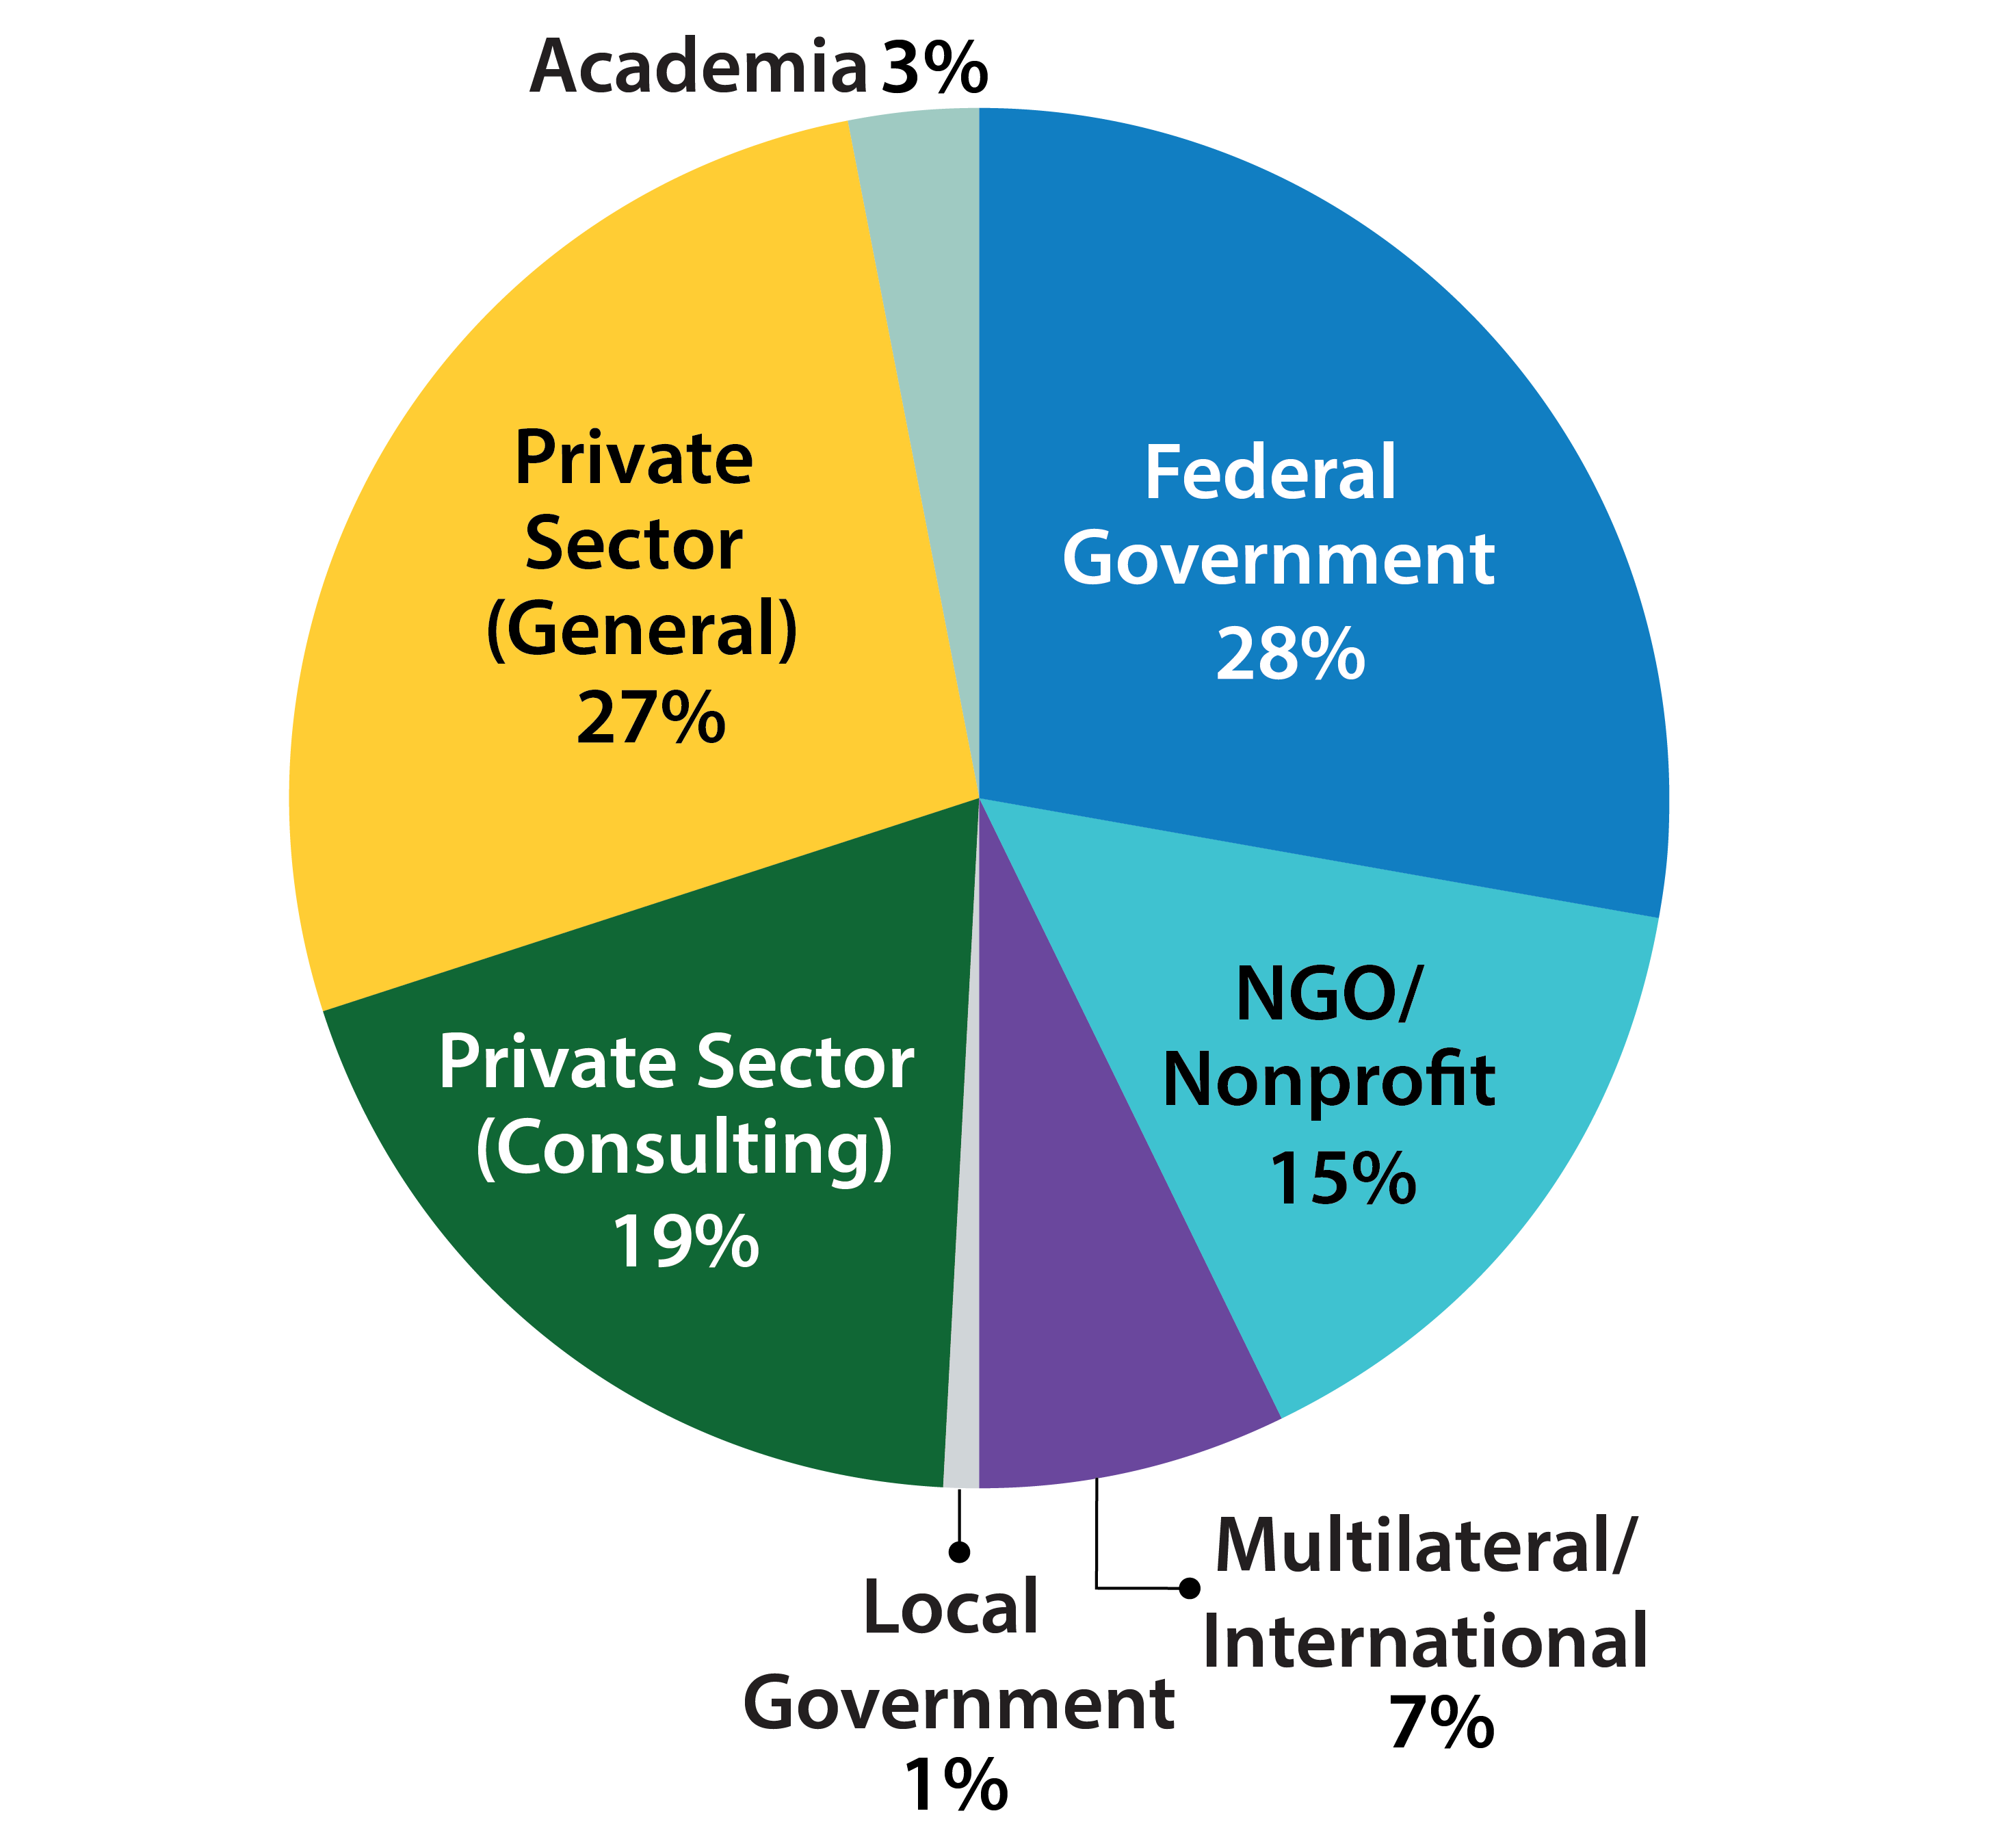 Pie Chart: Federal Government 28%, NGO/Nonprofit 15%, Multilateral/International 7%, NGO/Nonprofit 15%, Private Sector (Consulting) 15%, Private Sector (general) 27%, Academia 3%